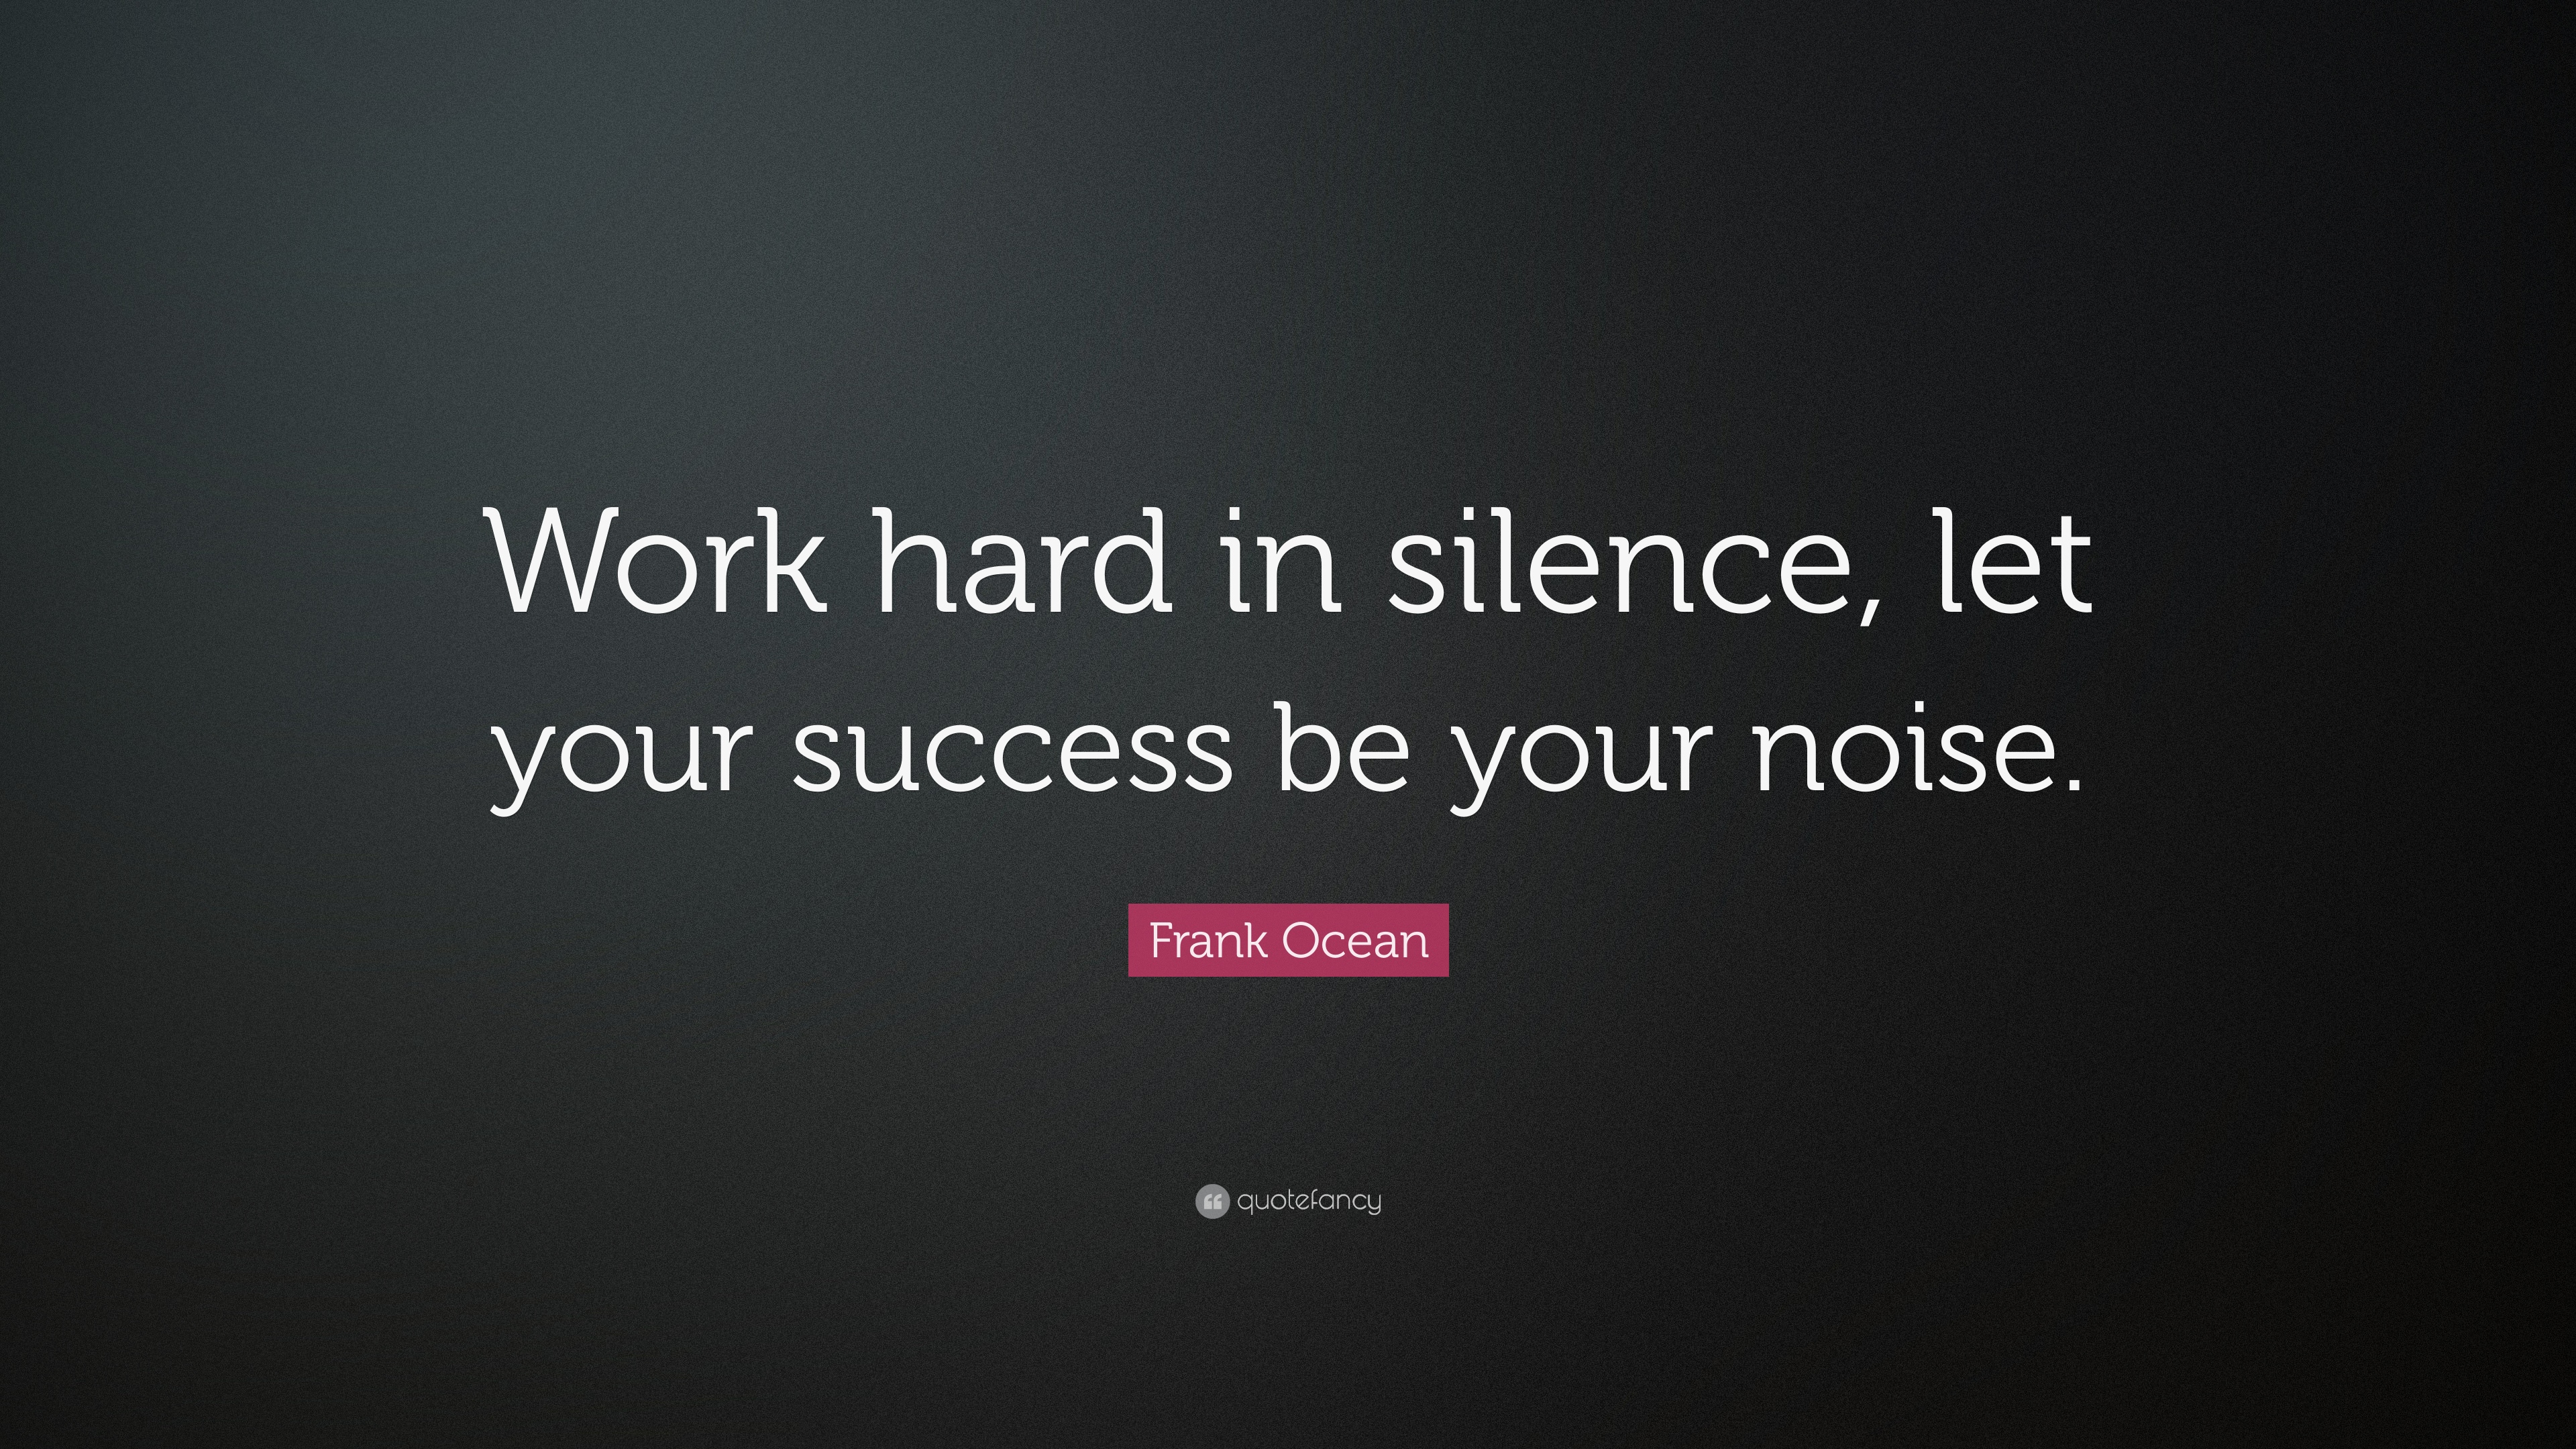 Frank Ocean Quote Work hard in silence, let your success be your